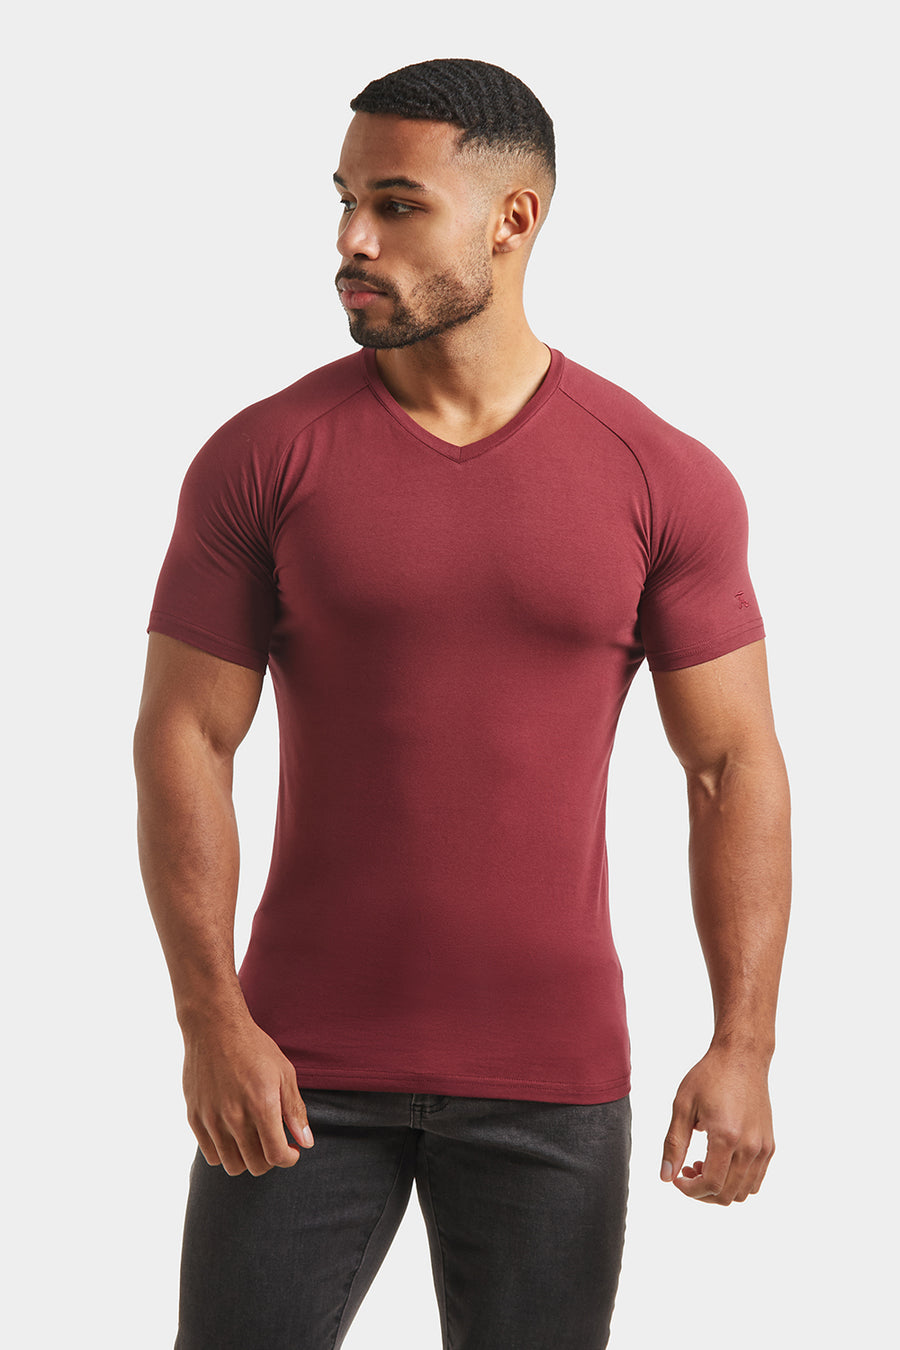 Athletic Fit V-Neck in Burgundy - TAILORED ATHLETE - USA